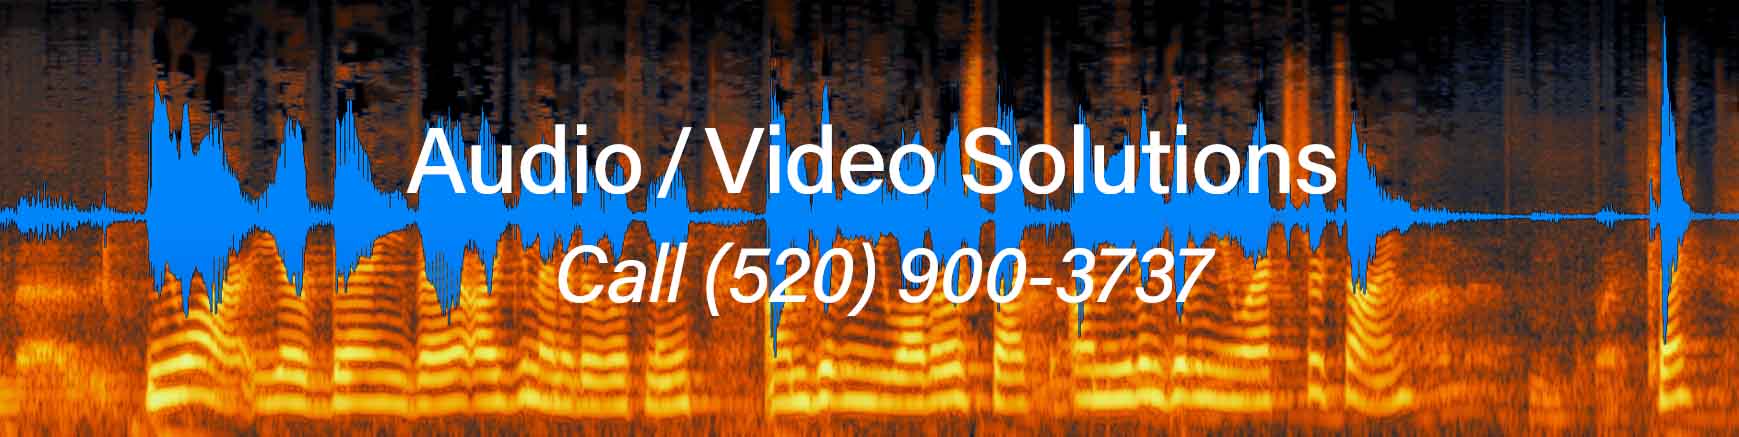 Audio/Video Solutions banner